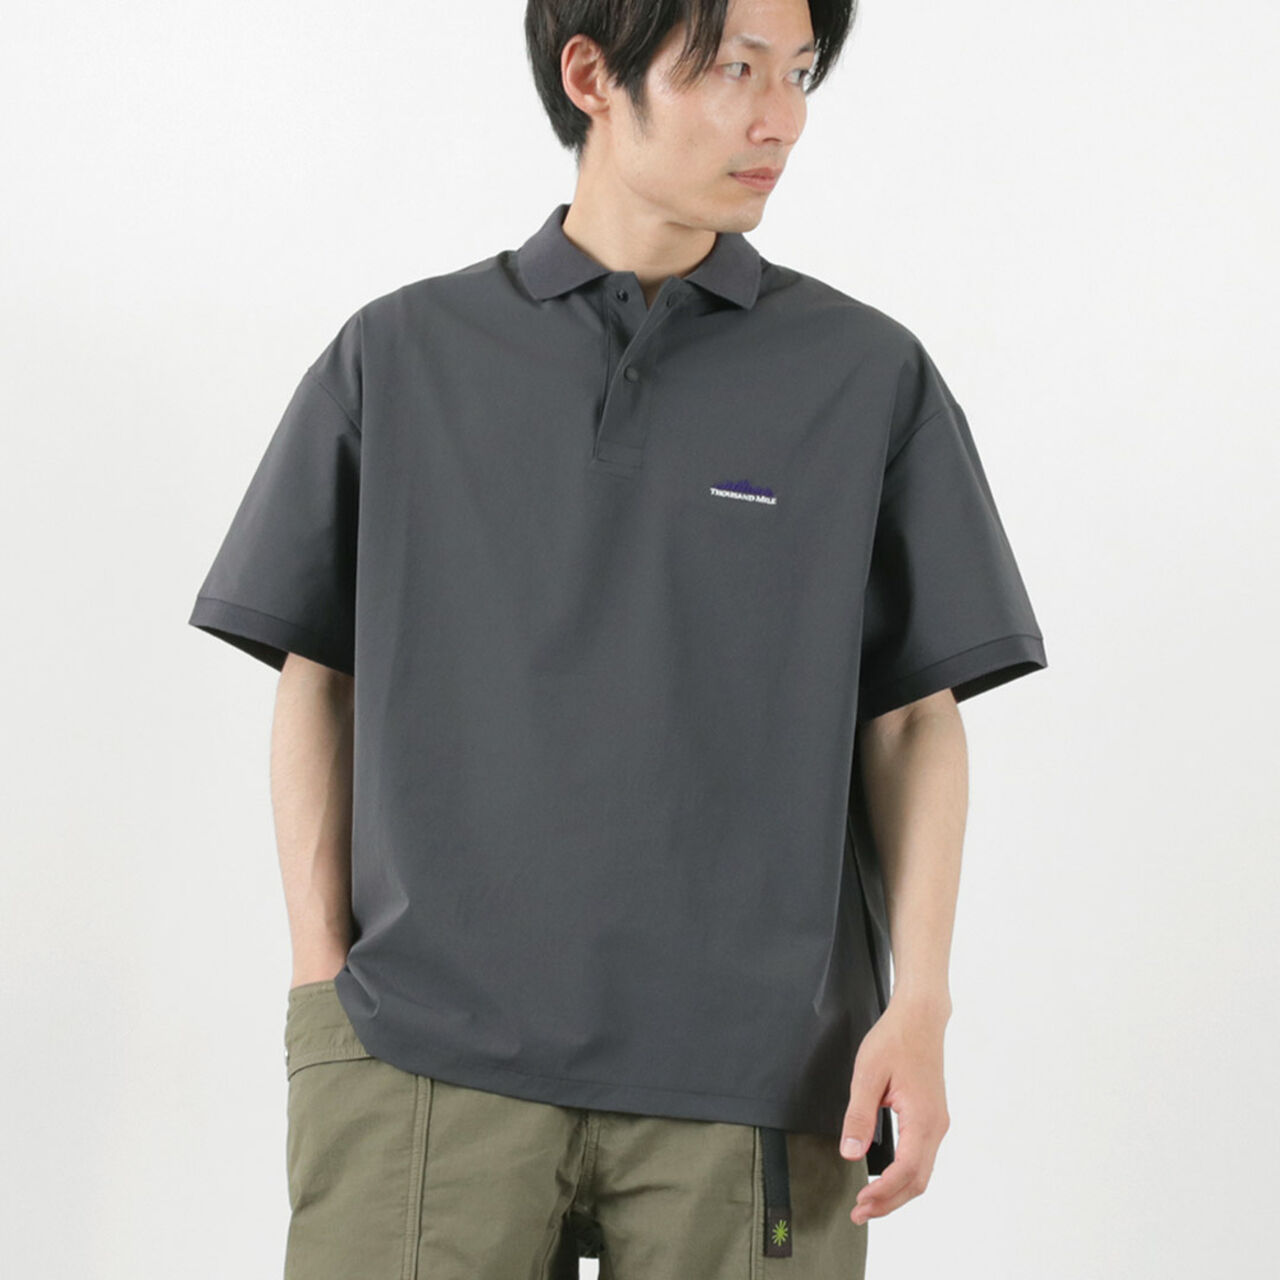 Water Repellent Stretch Polo Shirt,DarkGrey, large image number 0